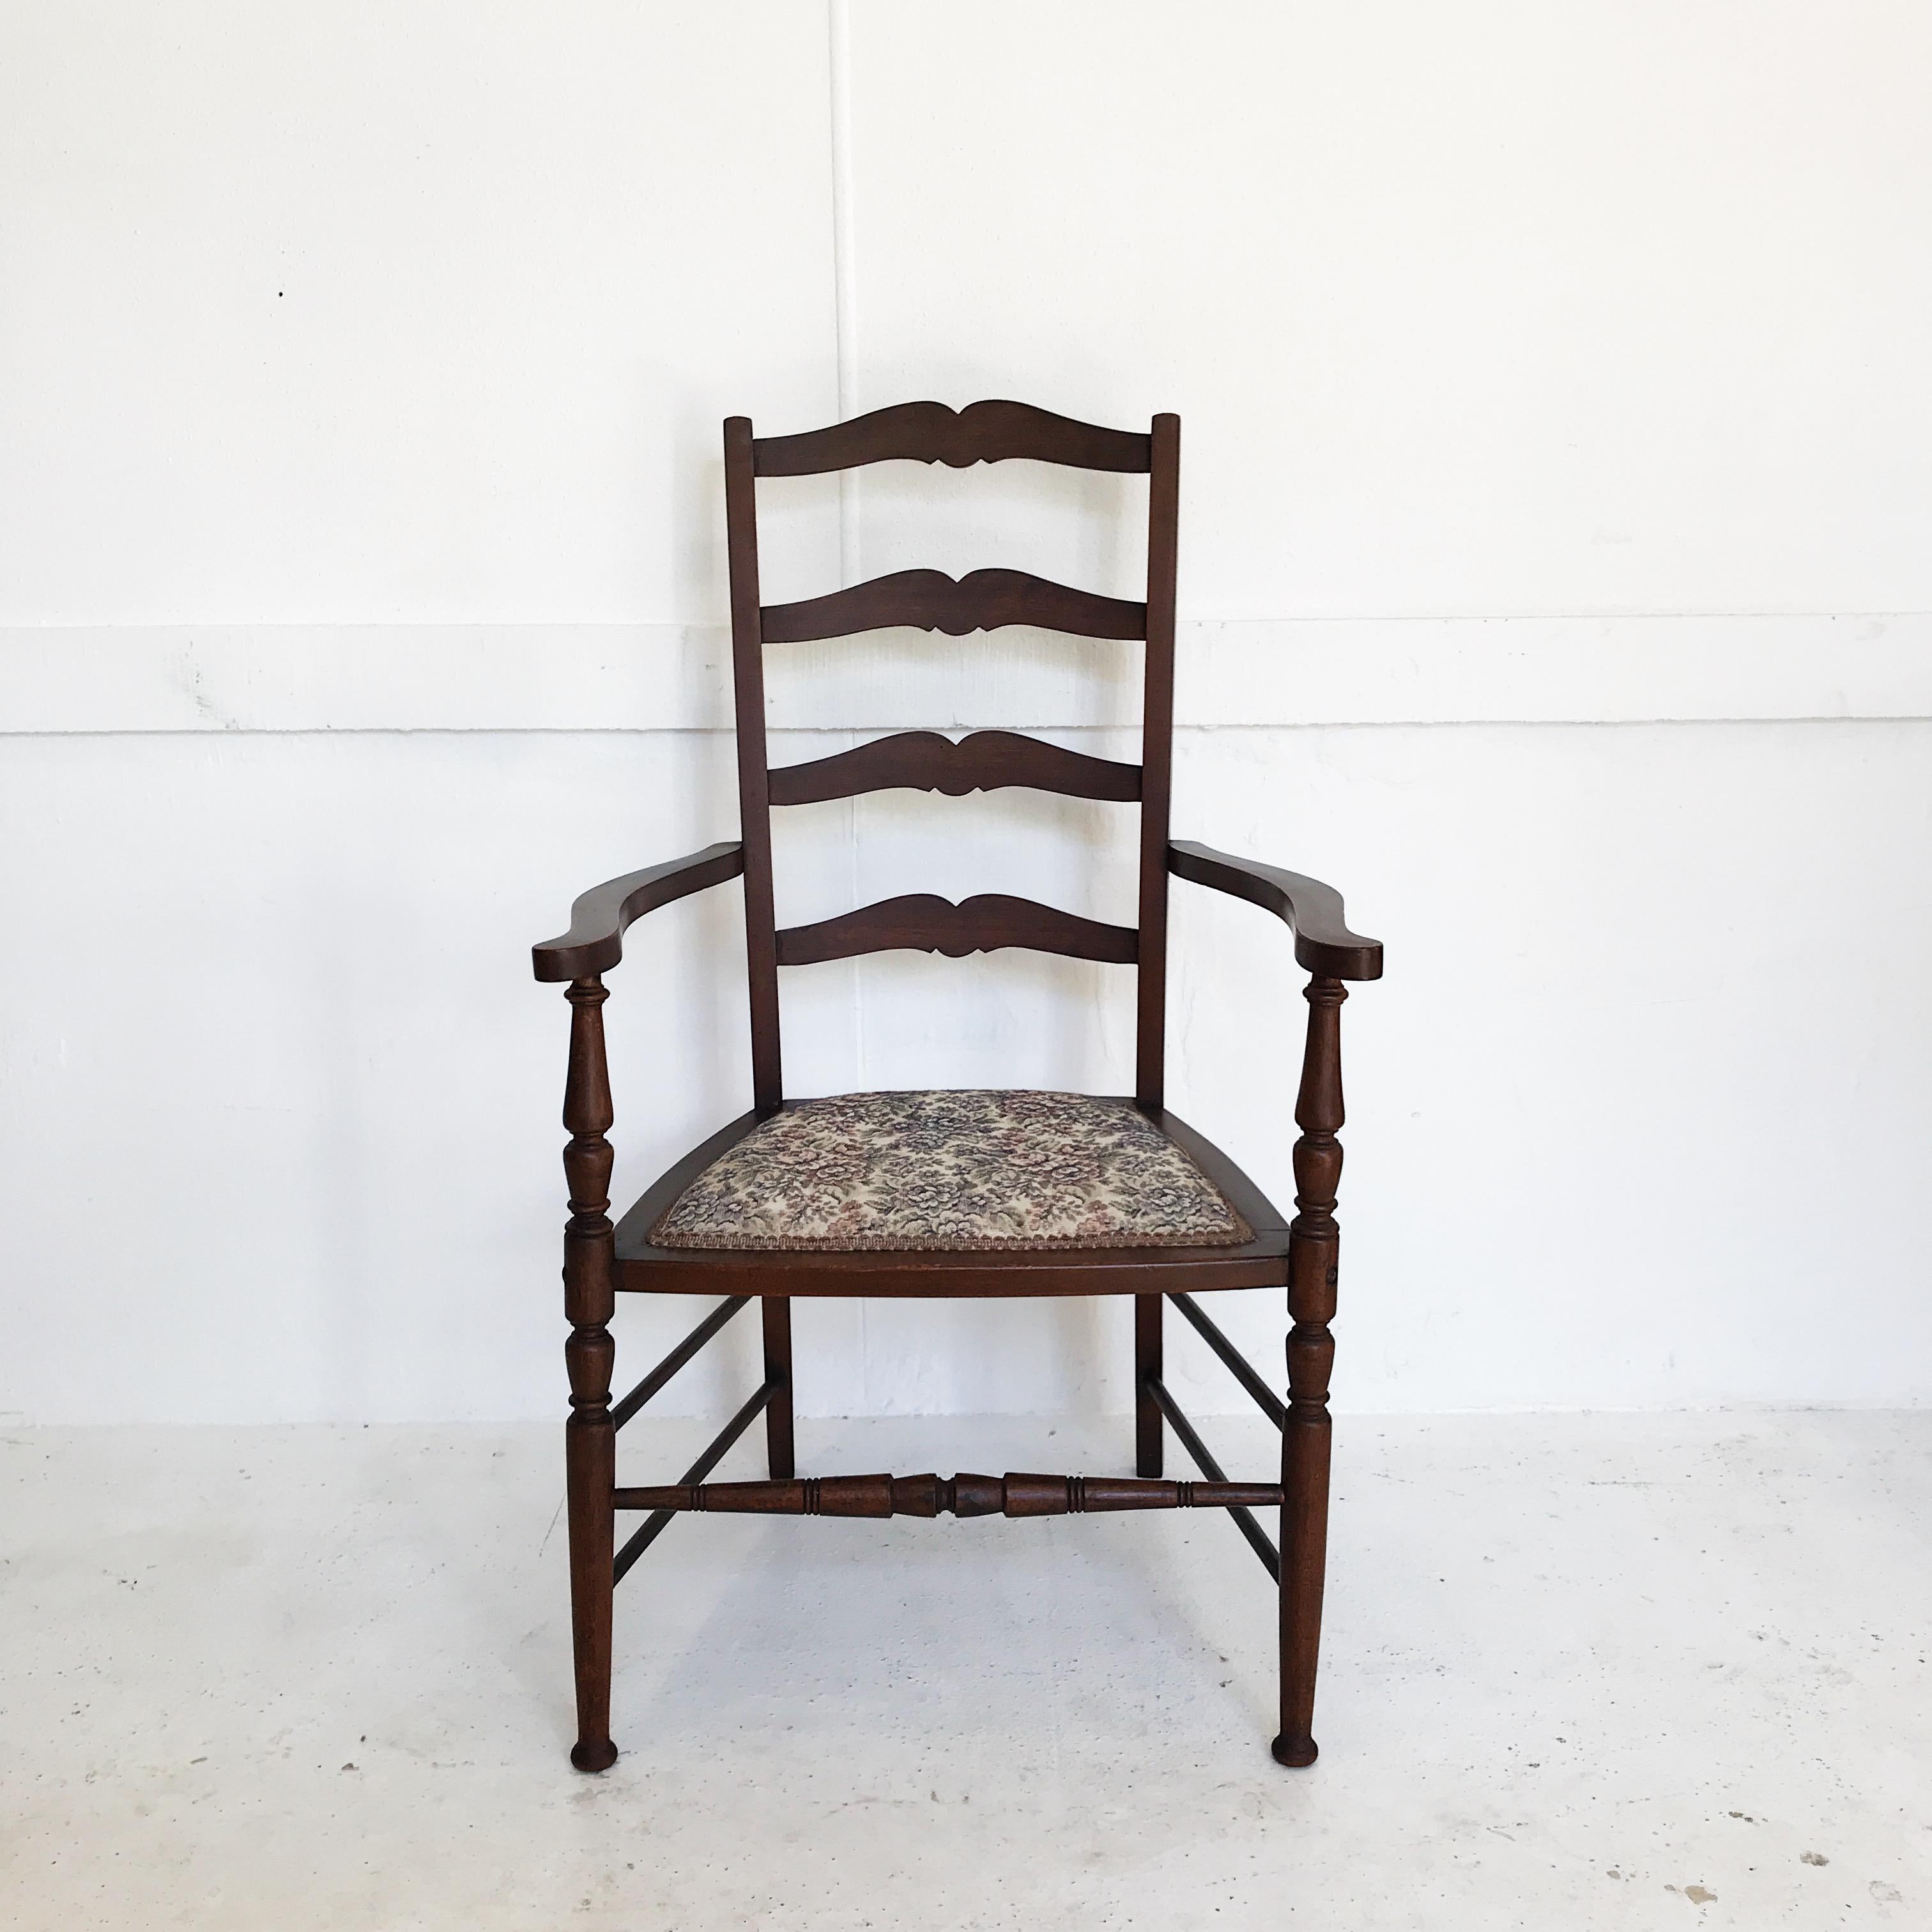 Beautifully delicate ladder back chair by Beard Watson Limited, Sydney retailer and manufacturer of high-class, quality furniture, circa 1910s. This piece was produced in the most prolific and renowned period of Beard Watson's tenure. 

Features